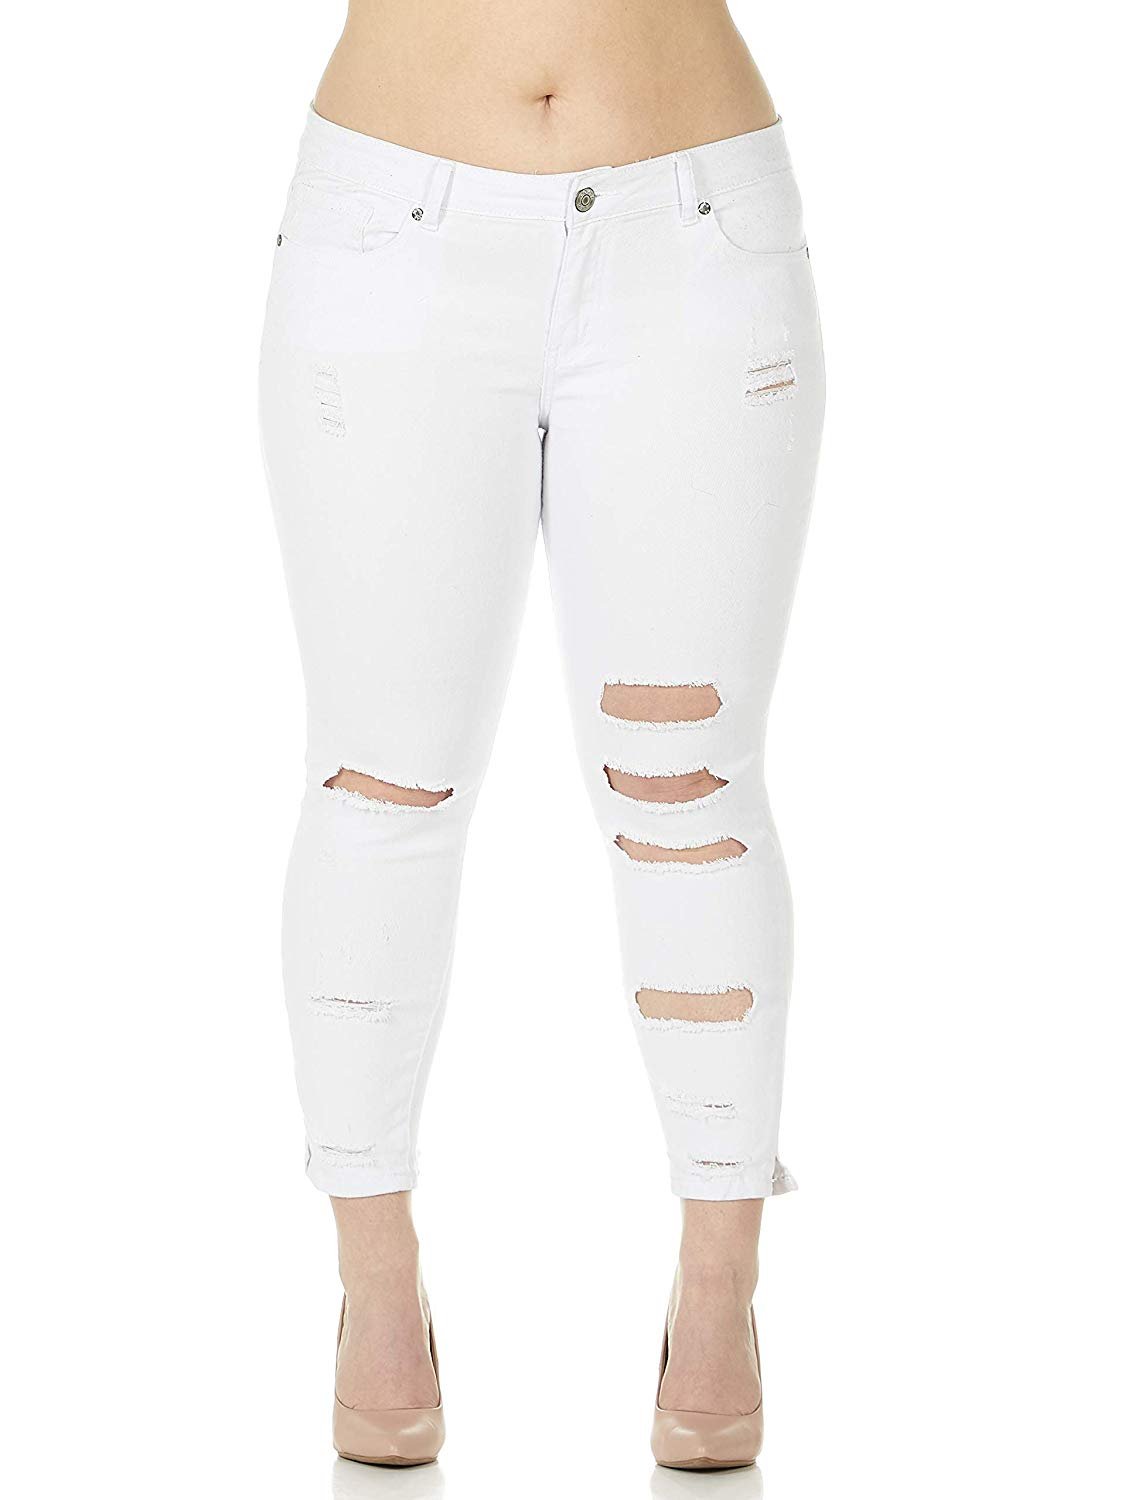 CG JEANS Plus Size Cute Juniors Big Mid Rise Large Ripped Torn Crop Skinny Fit, White Denim 24 - image 2 of 7